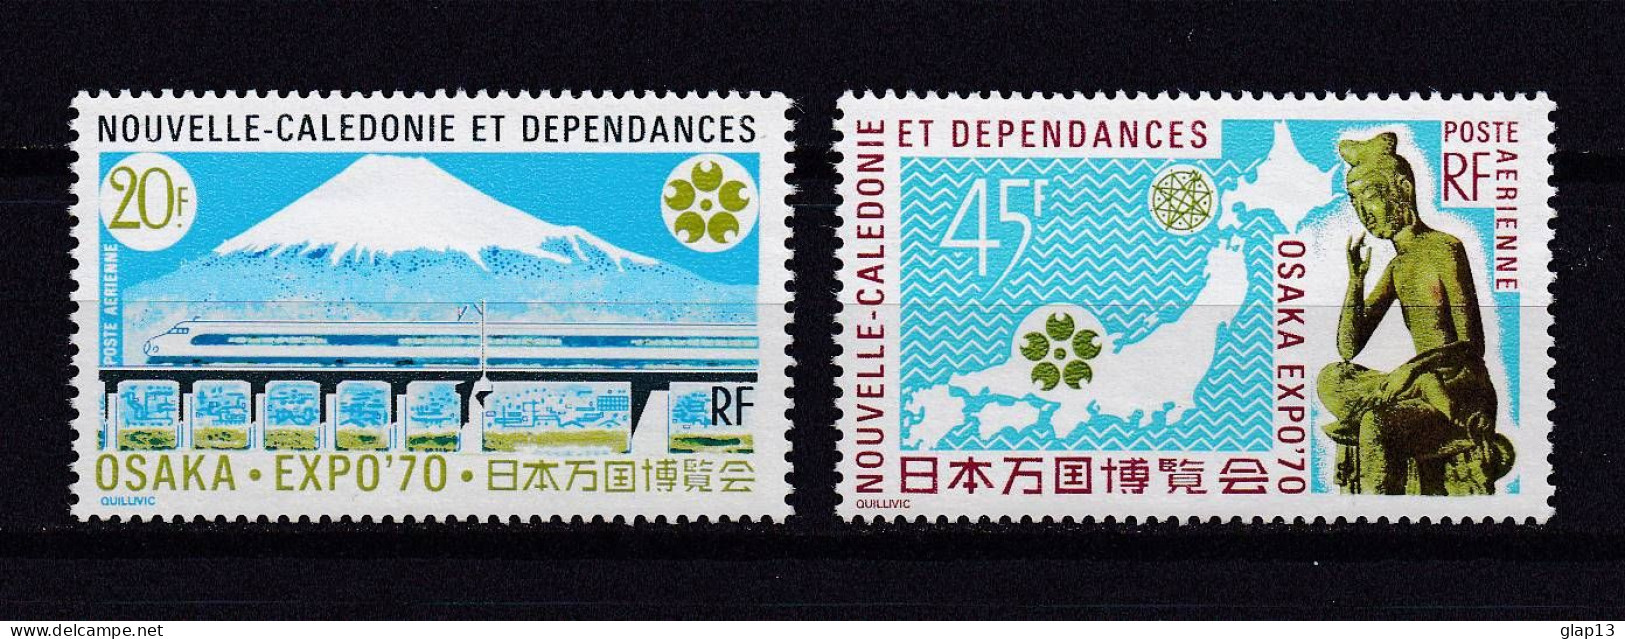 NOUVELLE-CALEDONIE 1970 PA N°117/18 NEUF** EXPOSITION - Gebraucht